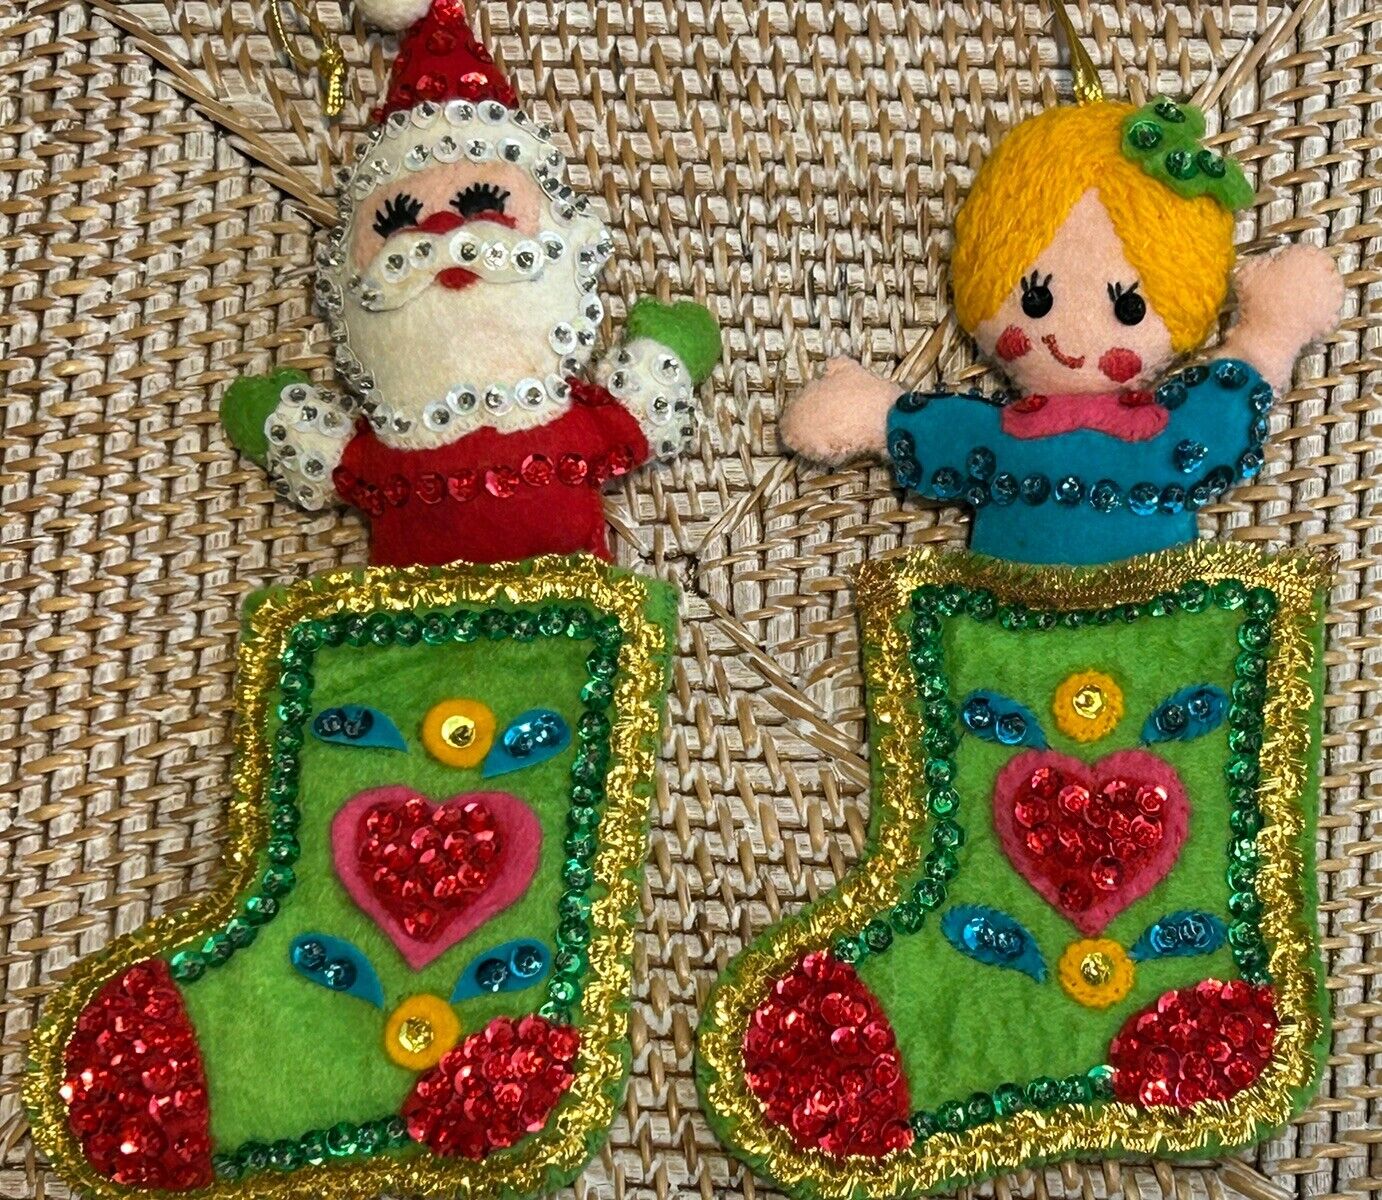 Vintage Felt Sequin Santa Claus & Doll In Stockings Christmas Ornaments Lot Of 2